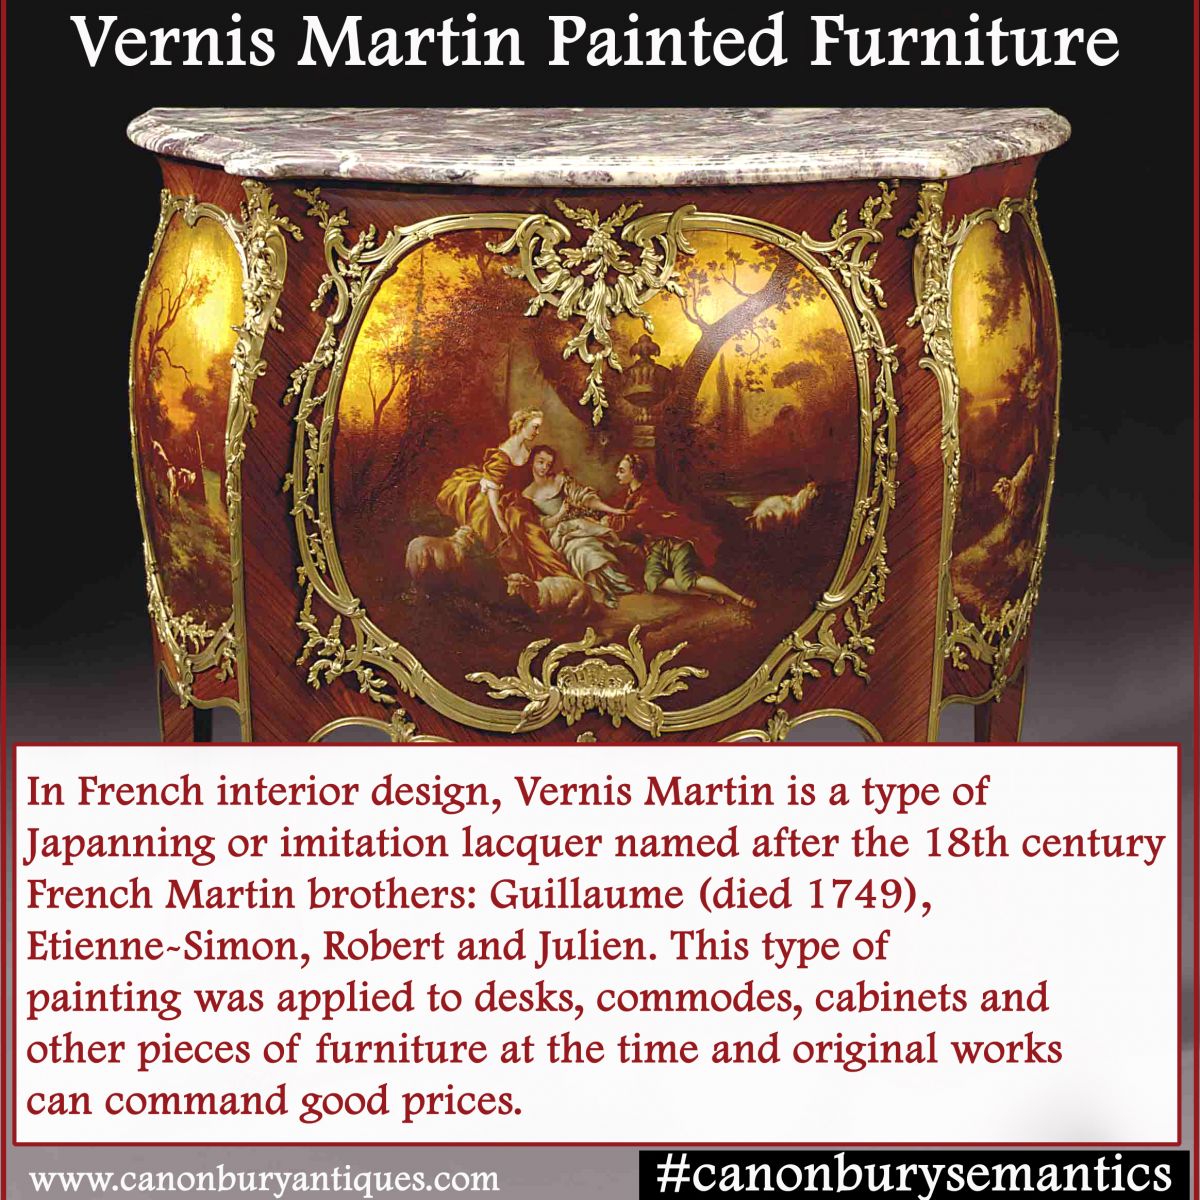 Vernis Martin painted furniture and French antiques